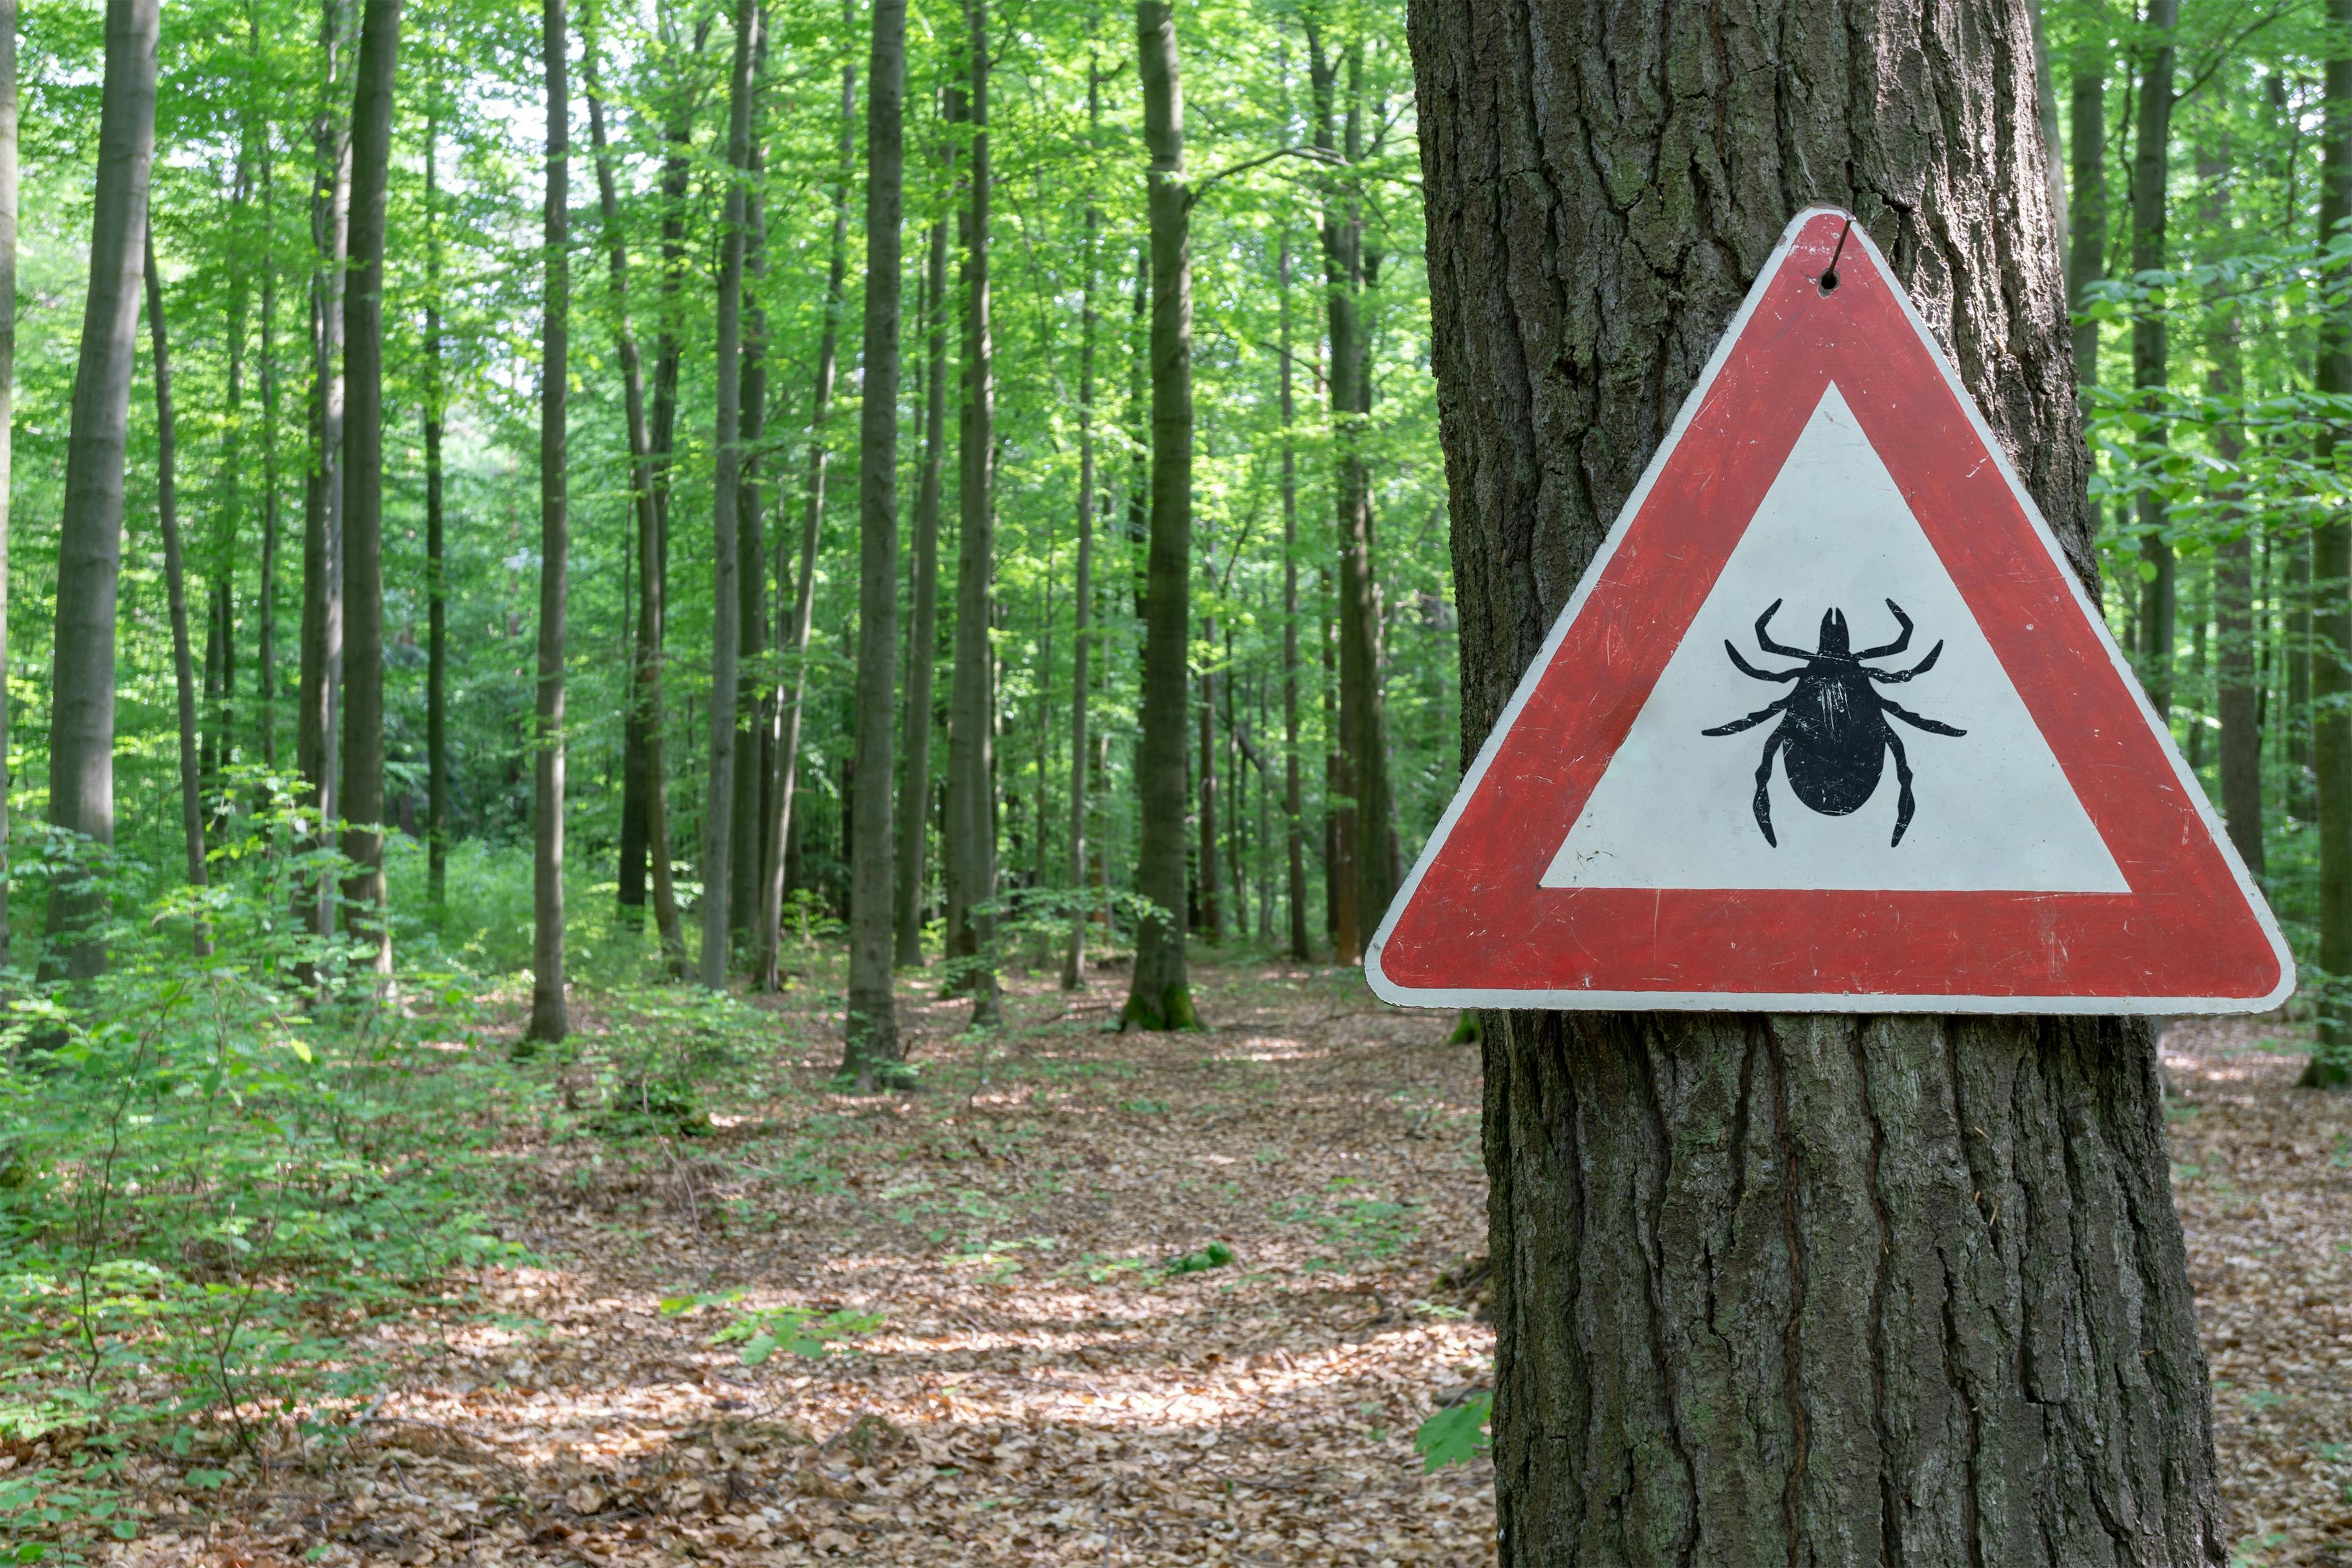 Pfizer, Valneva Report Positive Phase 2 Pediatric Date for Lyme Disease Vaccine Candidate